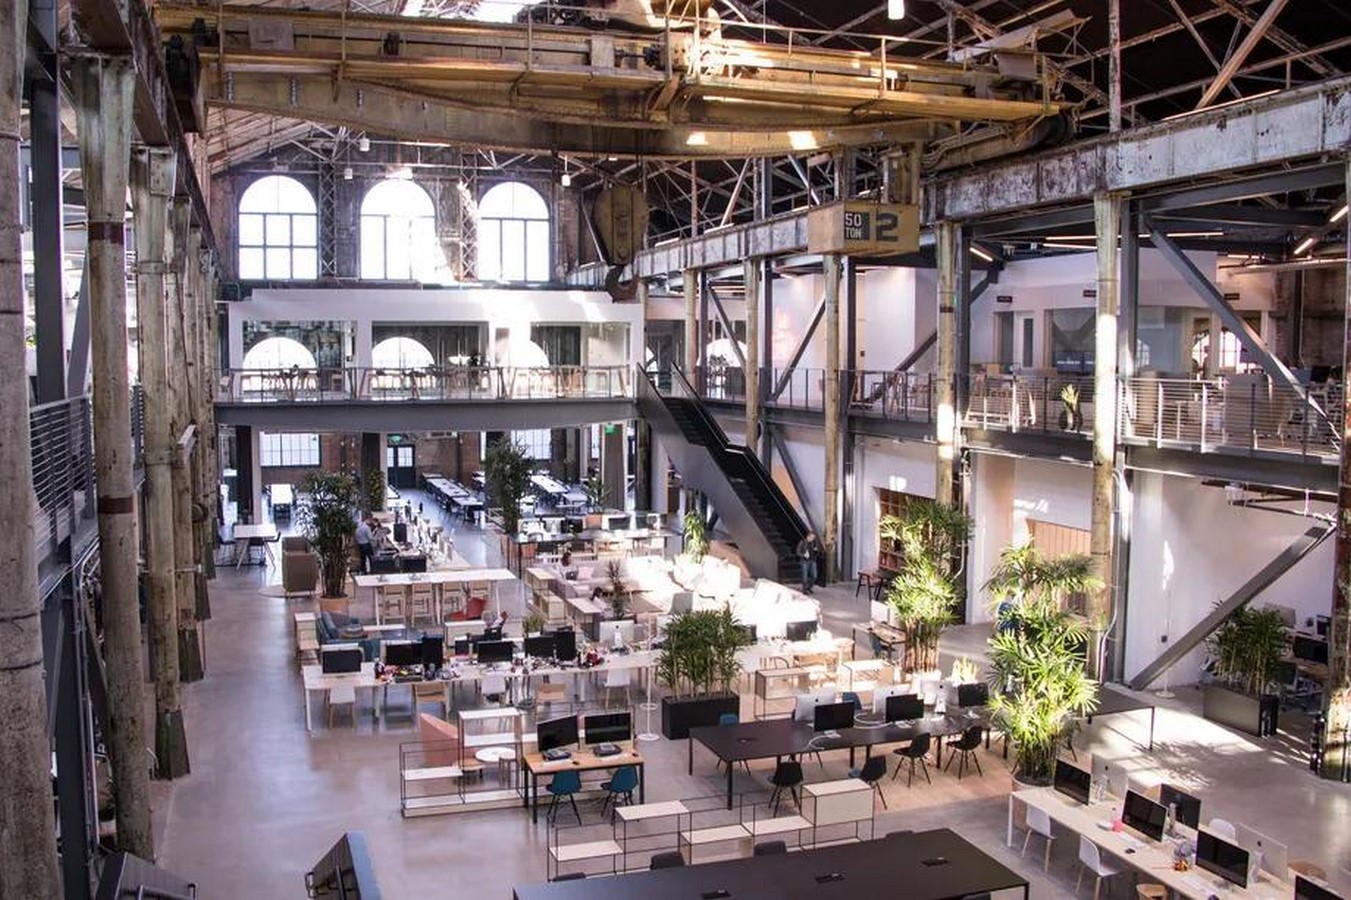 Gusto by Gensler: Transformation of a Warehouse - Sheet4